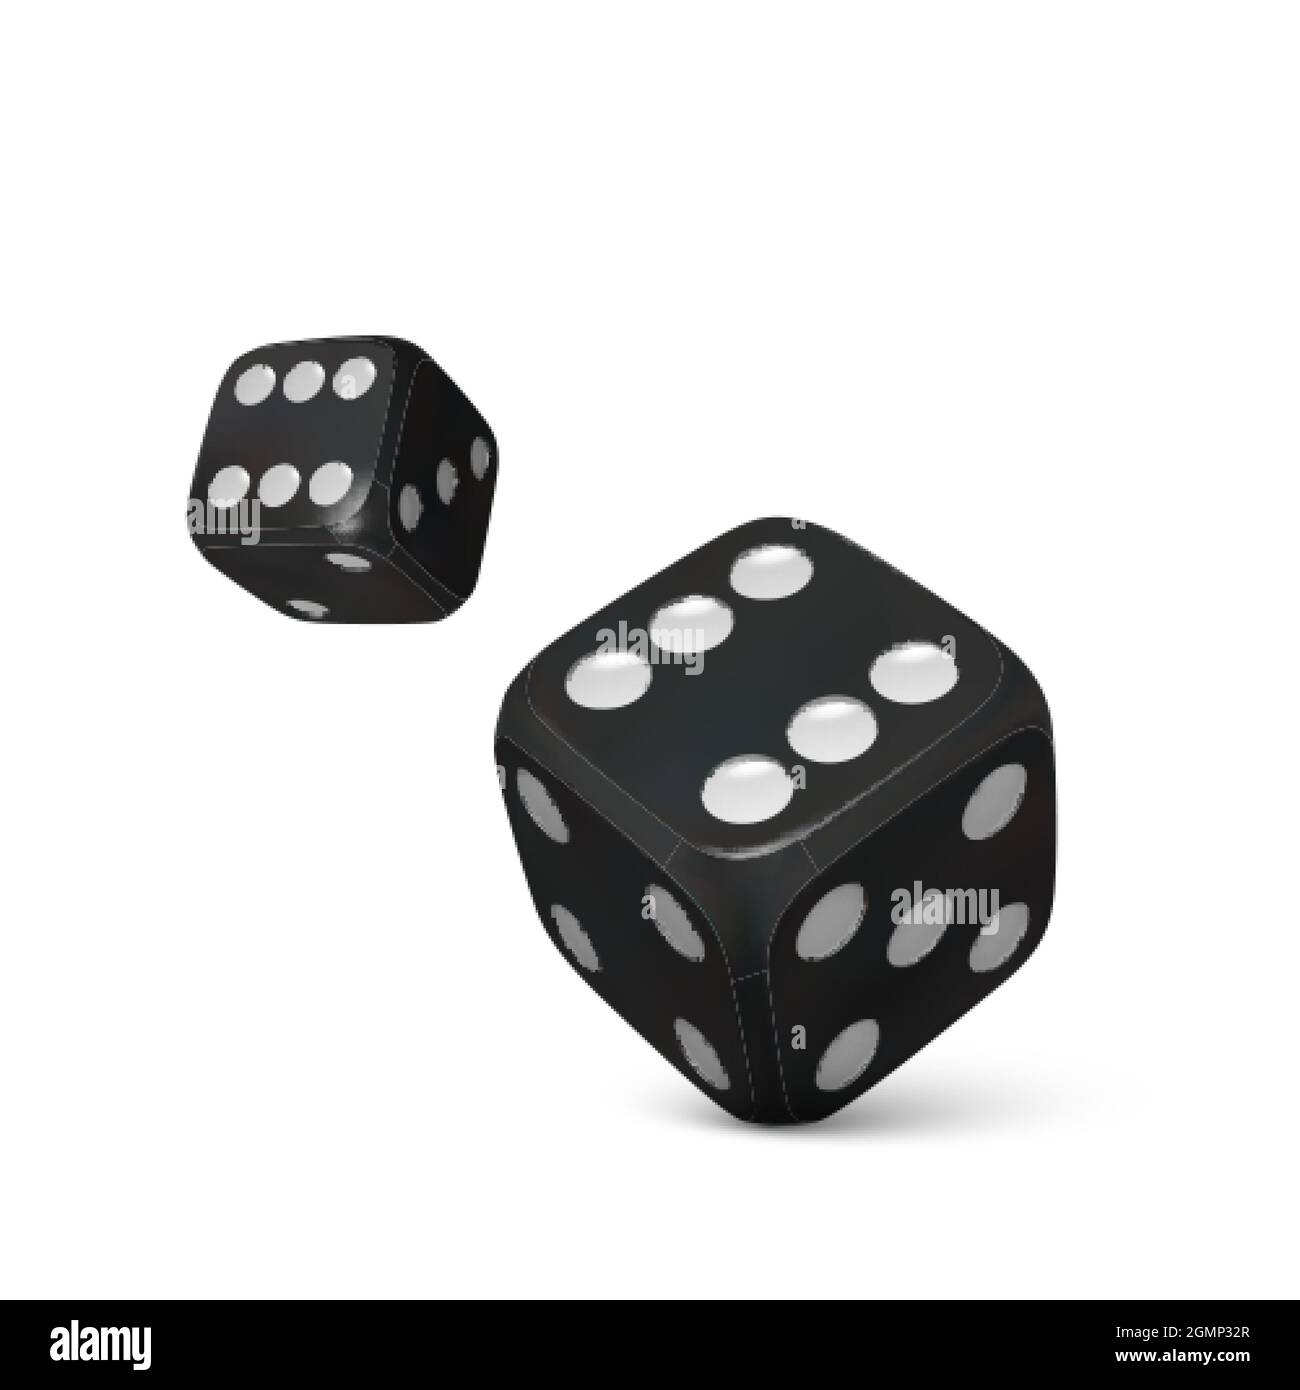 Dice Roll Stock Photo, Picture and Royalty Free Image. Image 11709947.